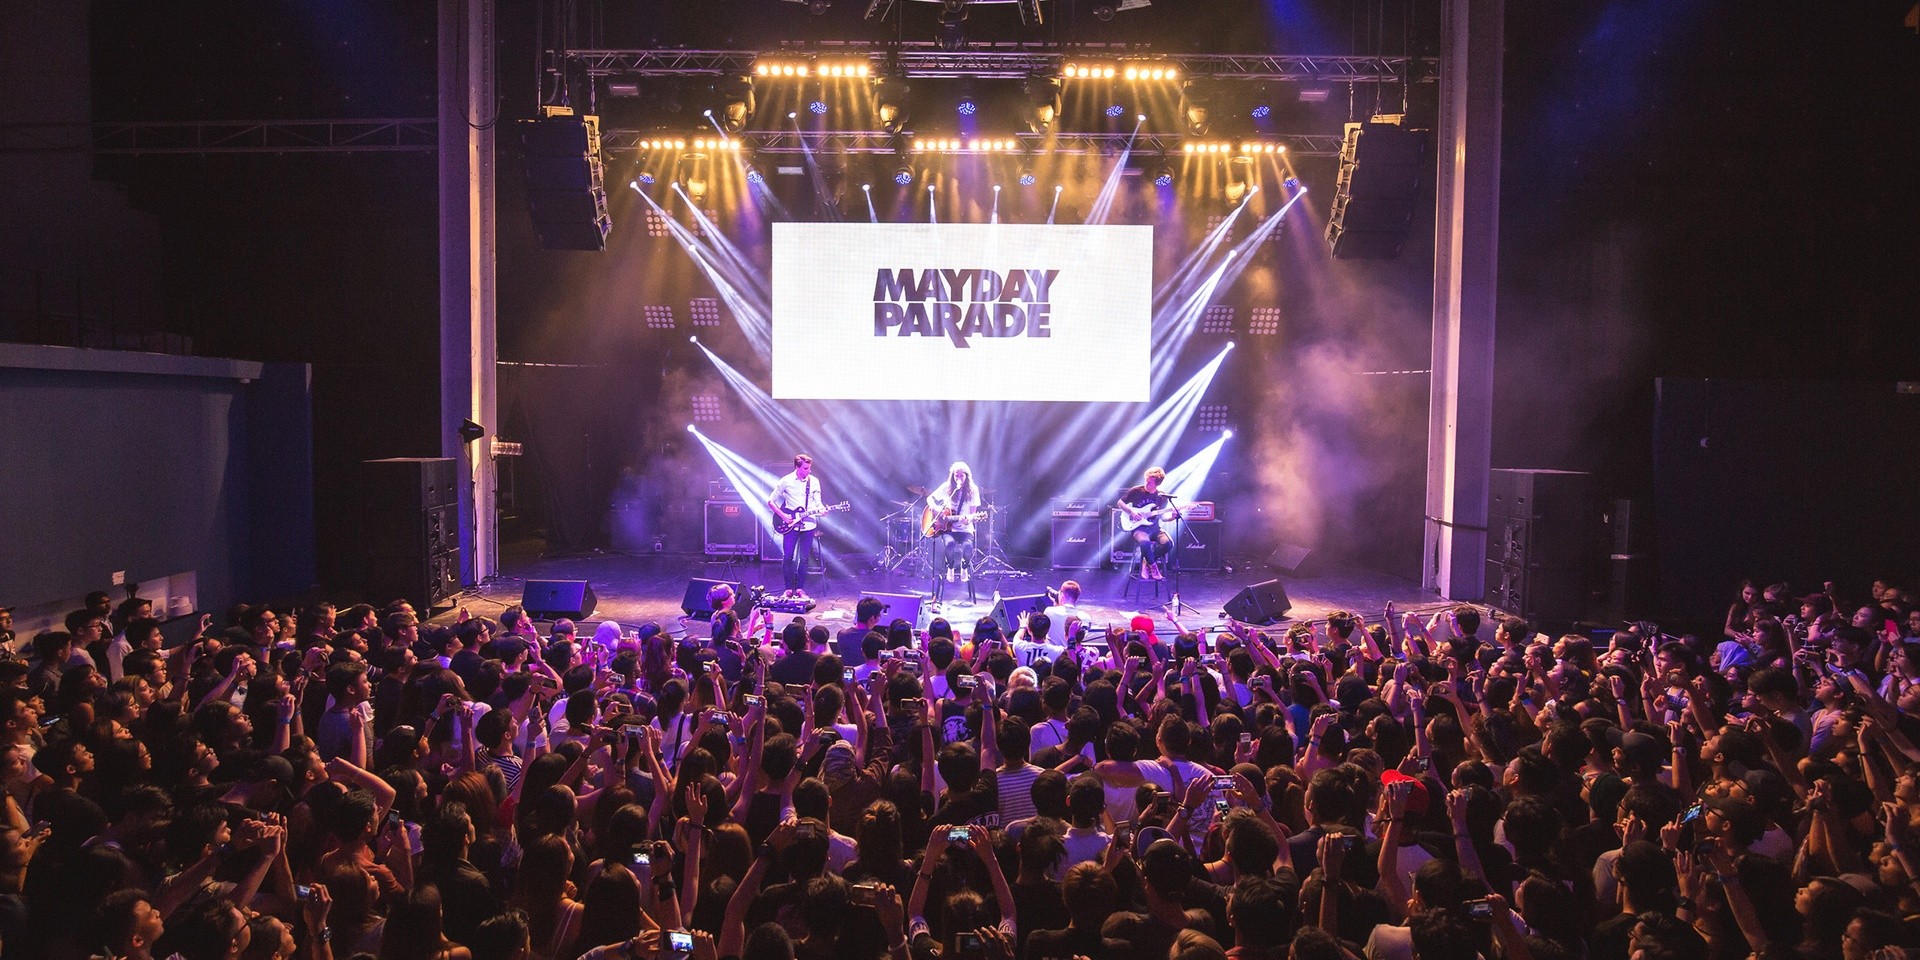 How a hurricane nearly derailed Mayday Parade's show in Singapore